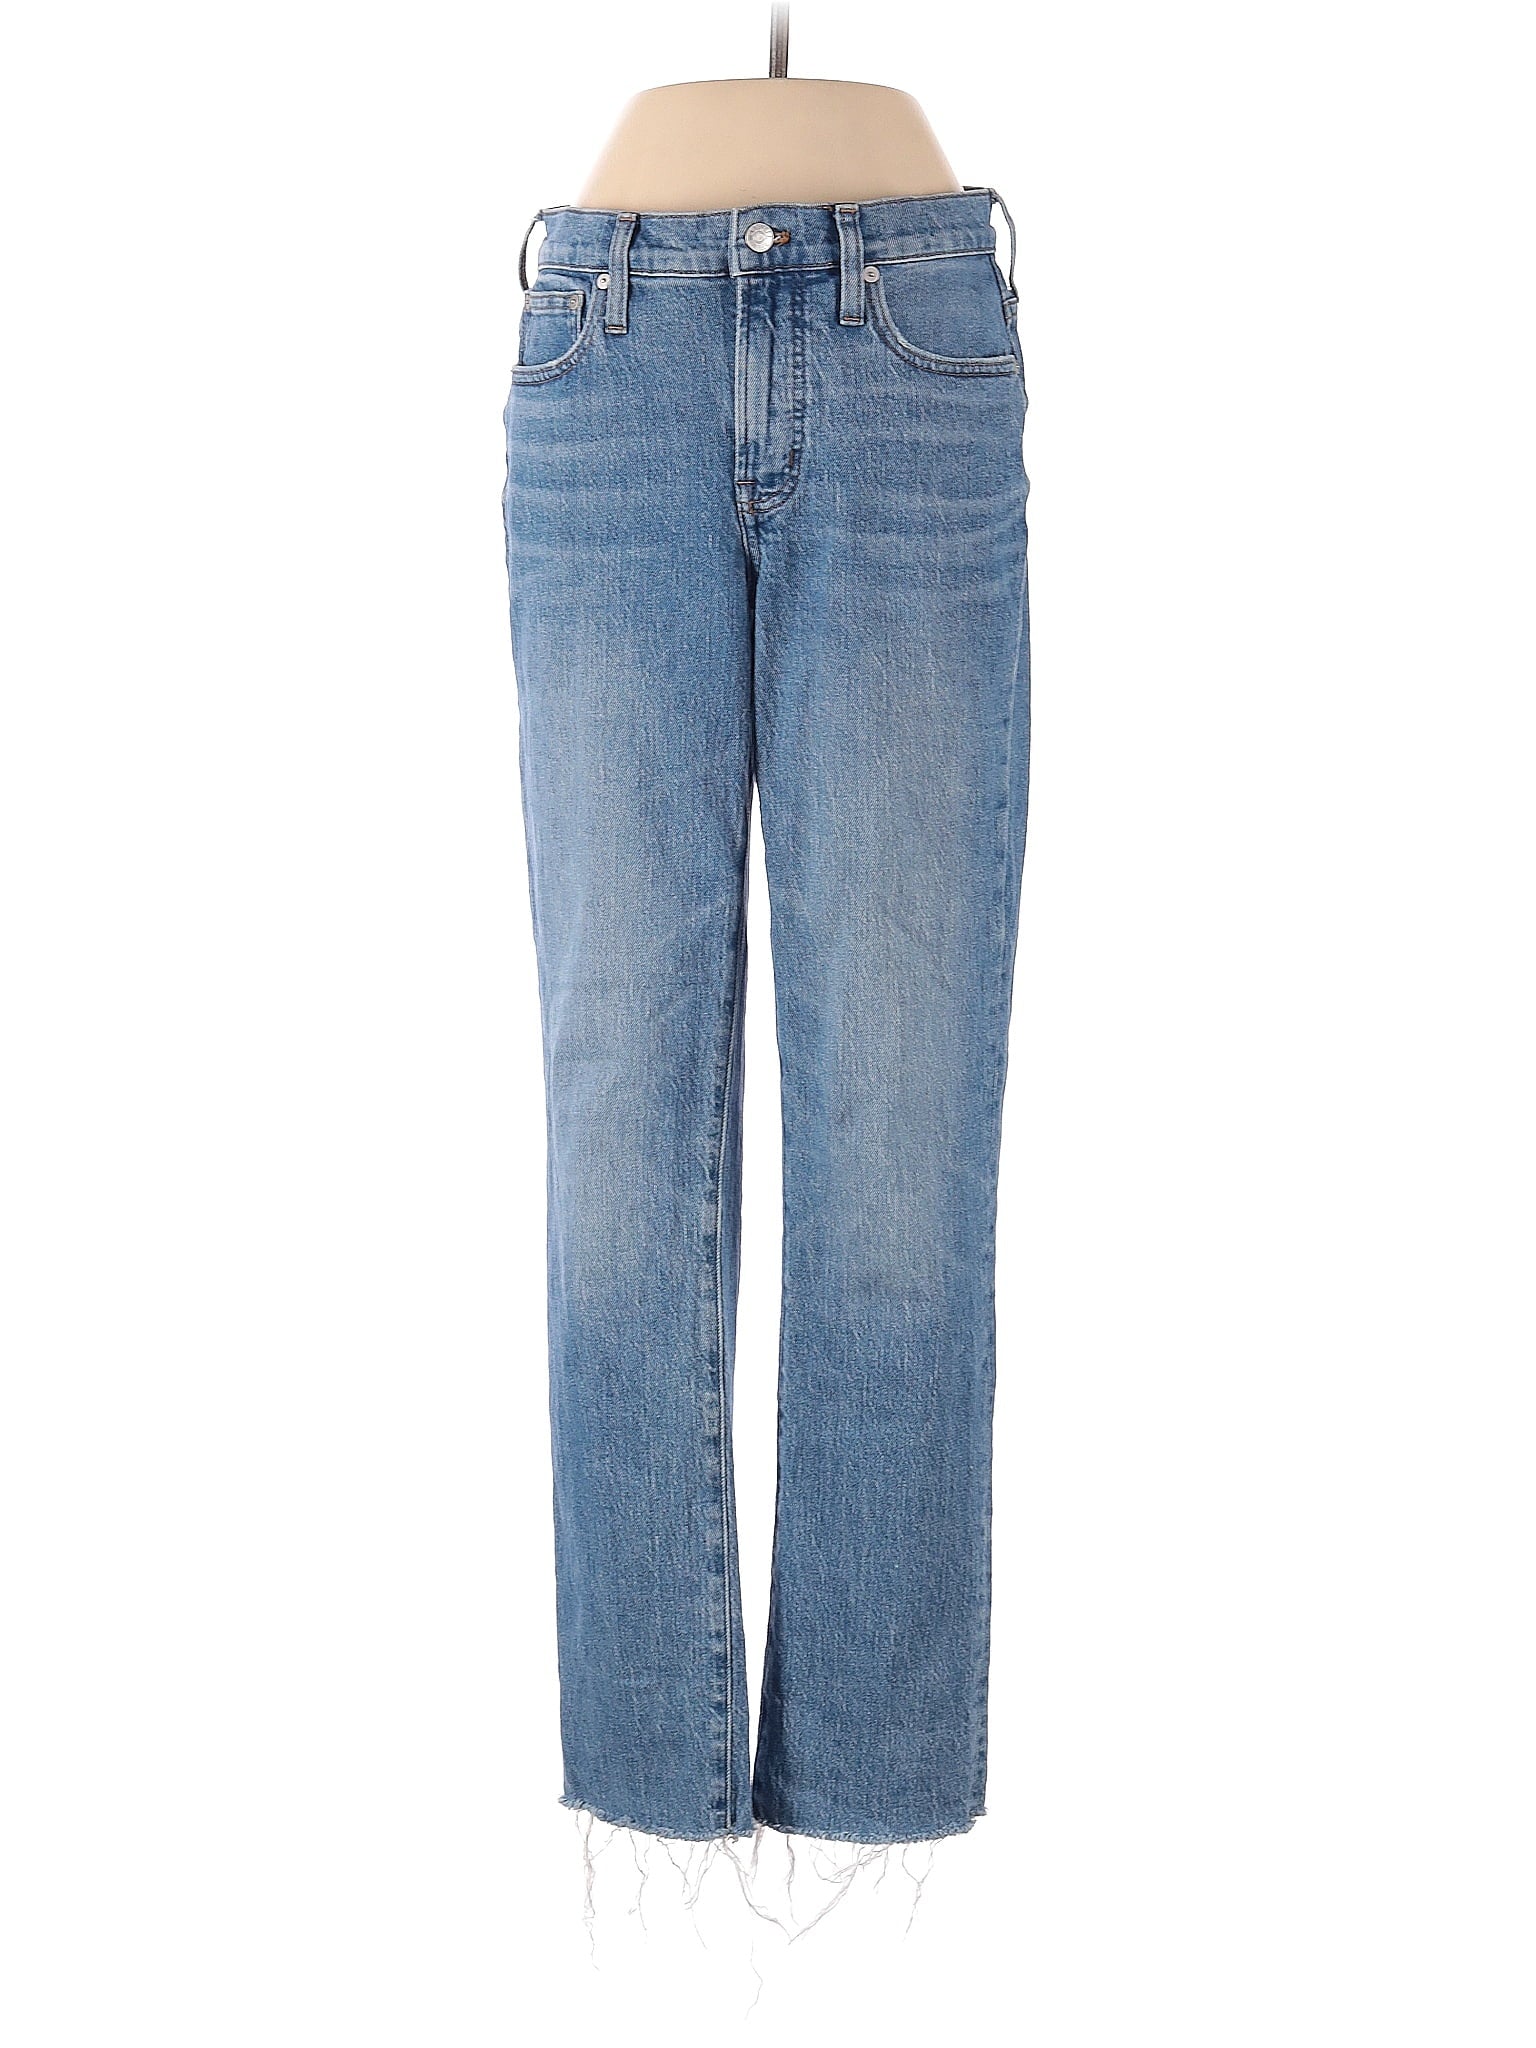 Mid-Rise Boyjeans The Tall Mid-Rise Perfect Vintage Jean In Enmore Wash in Medium Wash waist size - 26 T